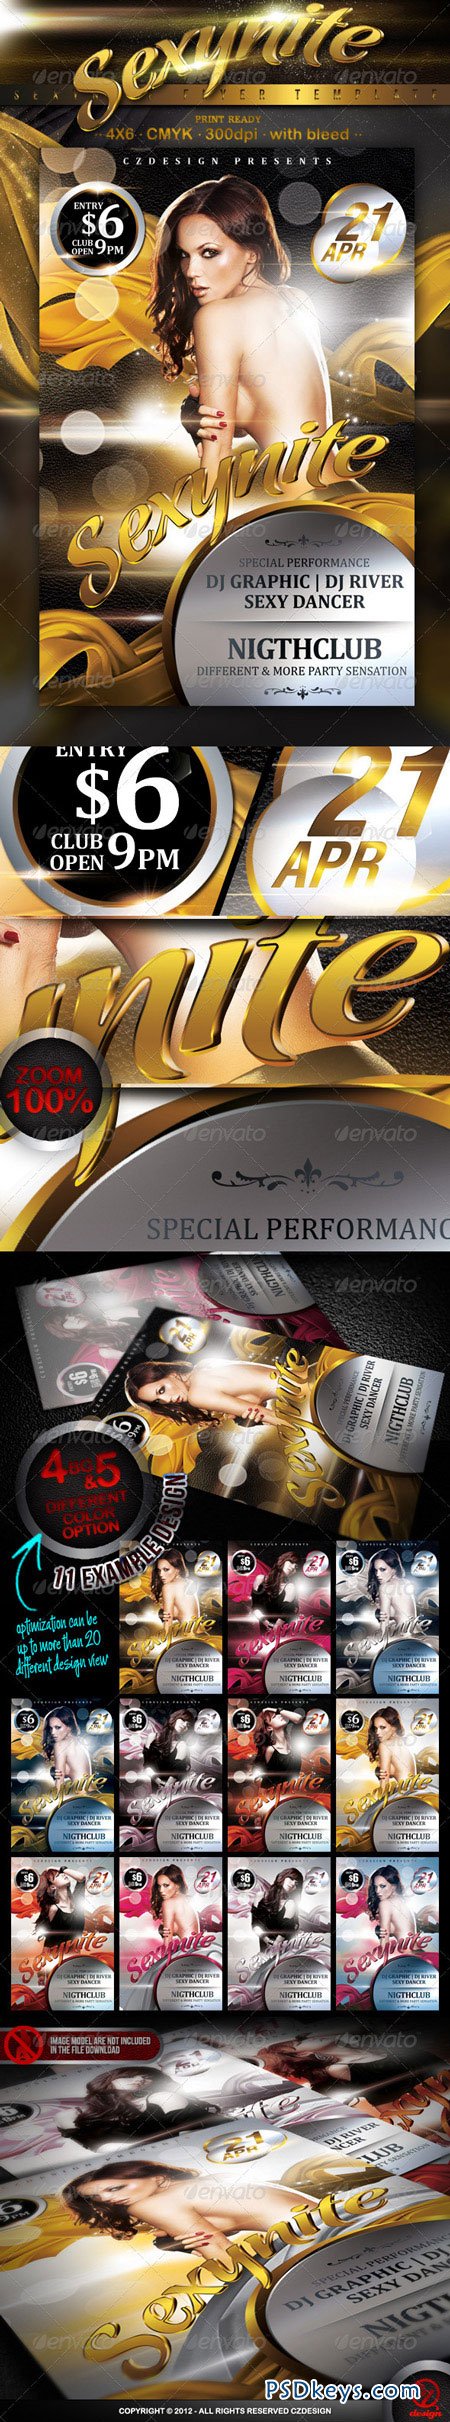 Sexynite Flyer Template 2012789